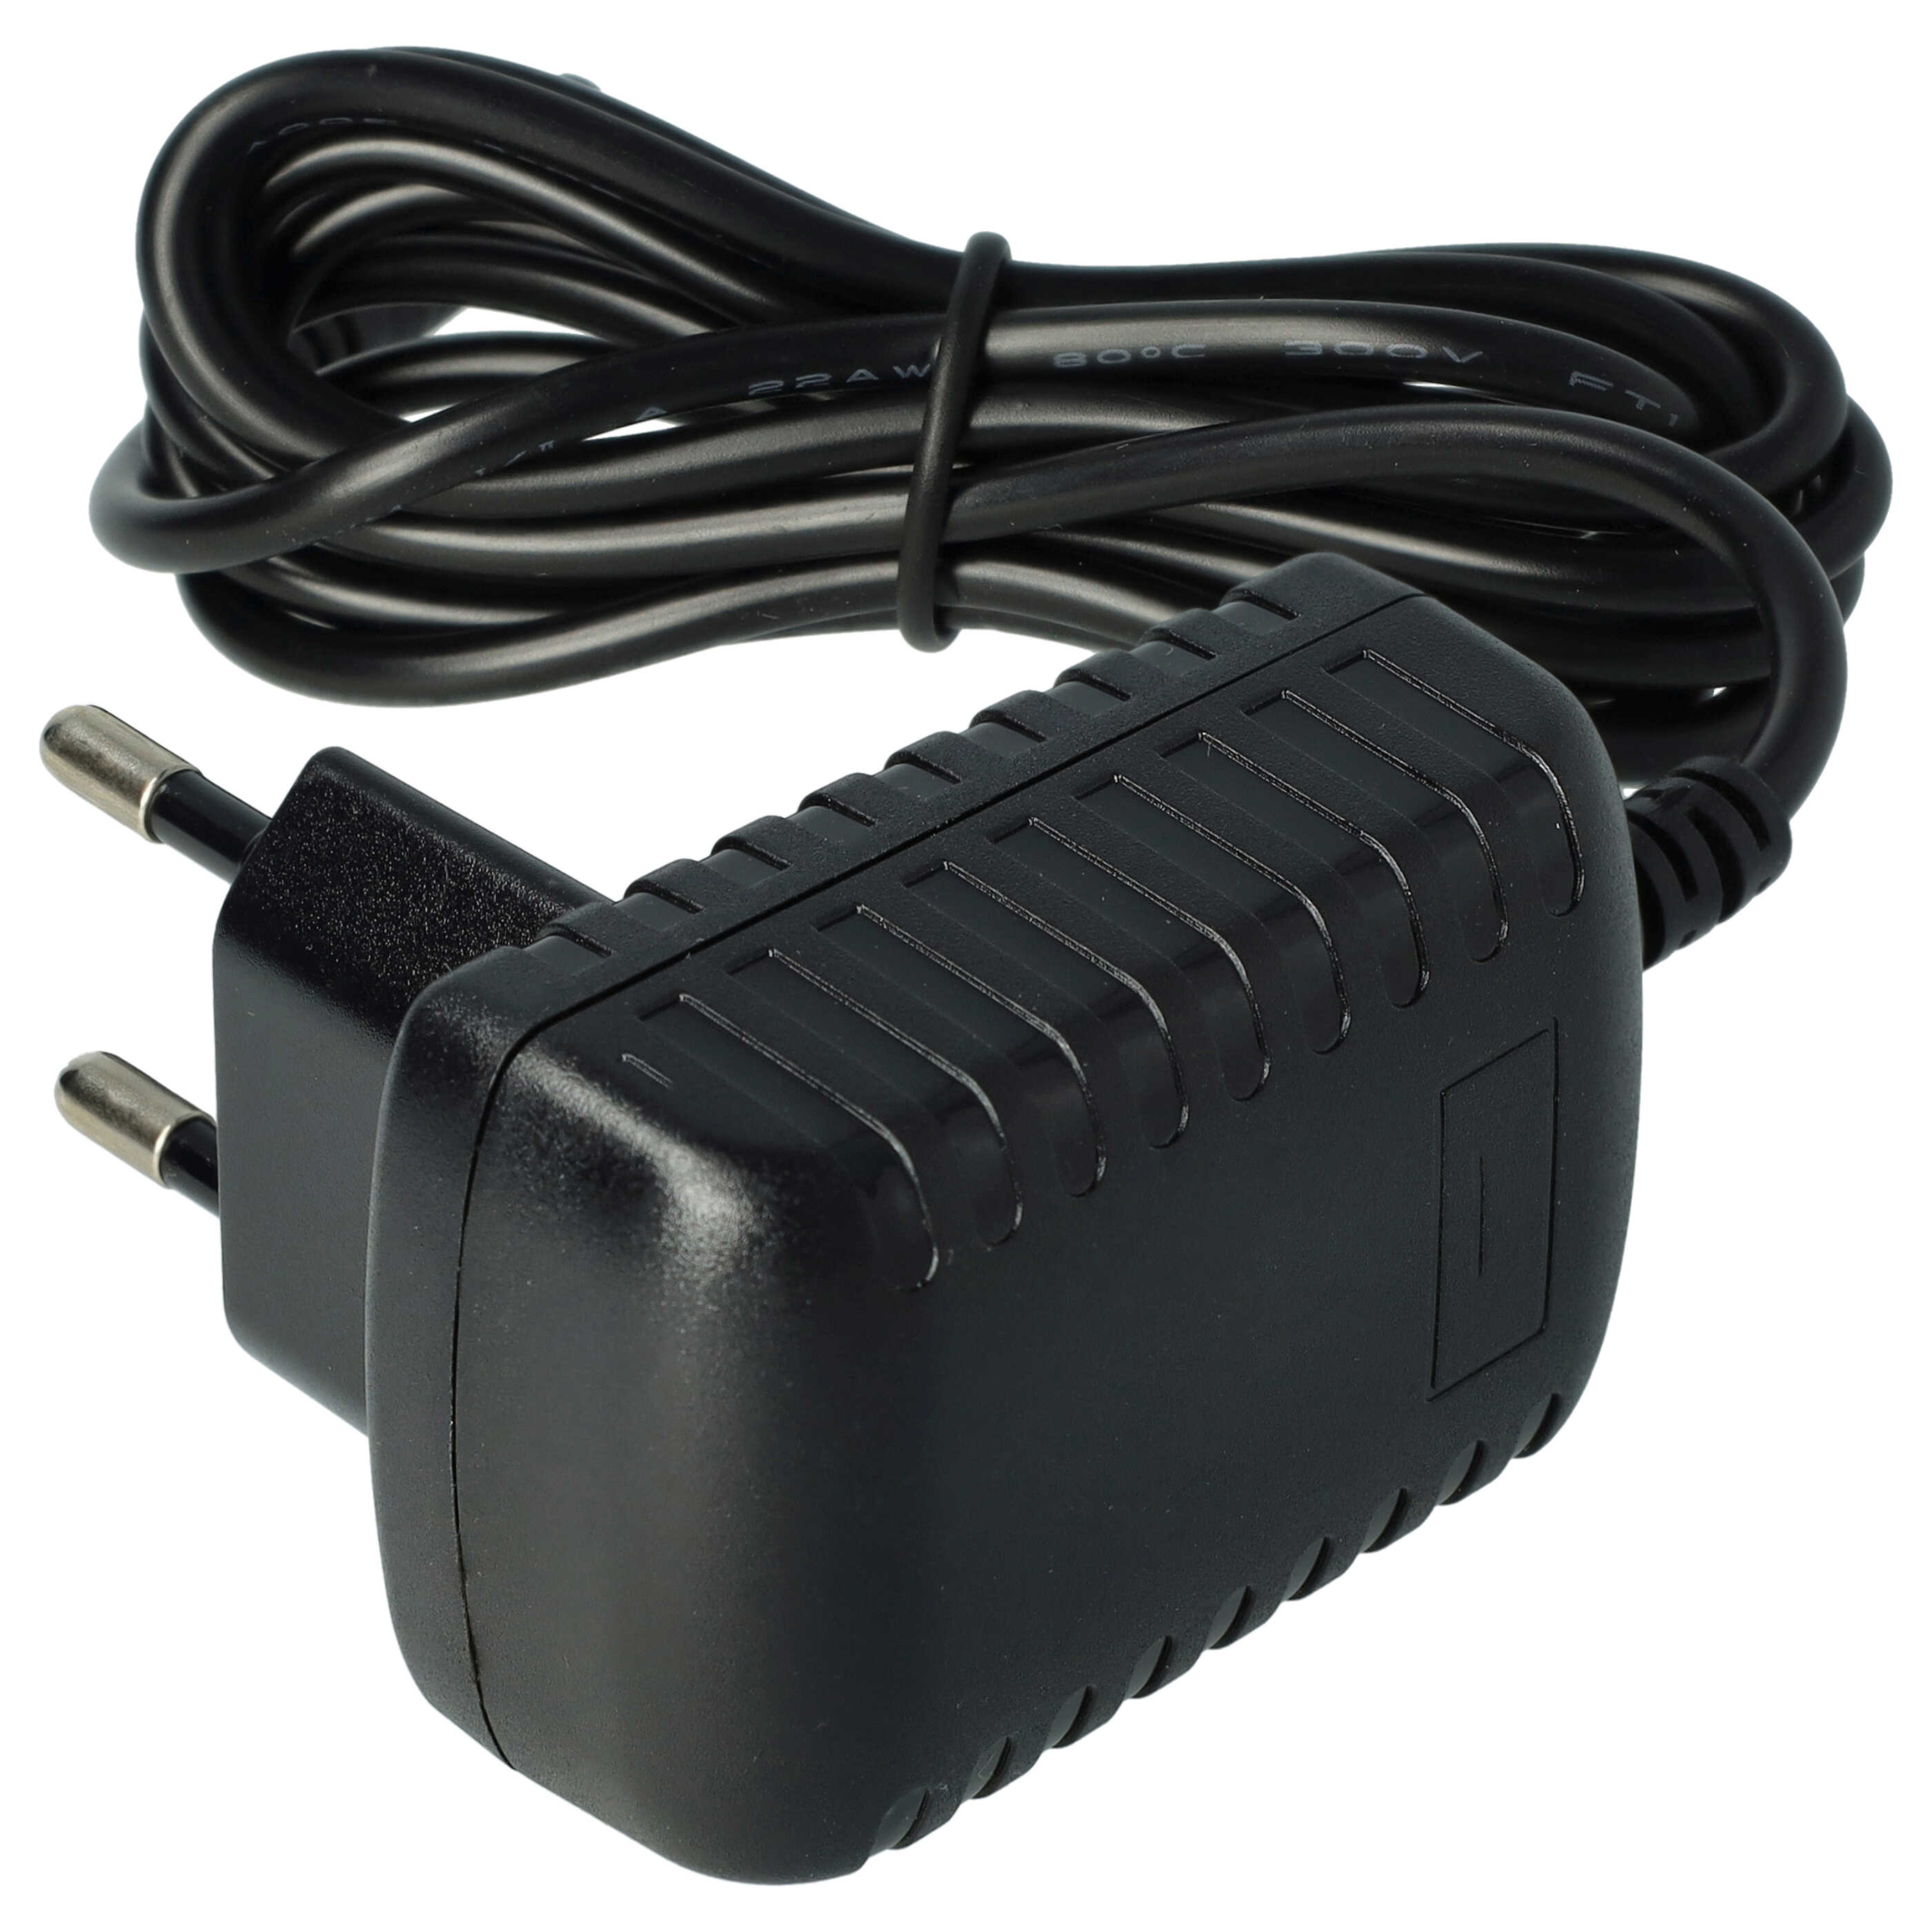 Mains Power Adapter replaces V-Tech 80-002181 for V-Tech Educational Toy, Learning Tablet - 110 cm